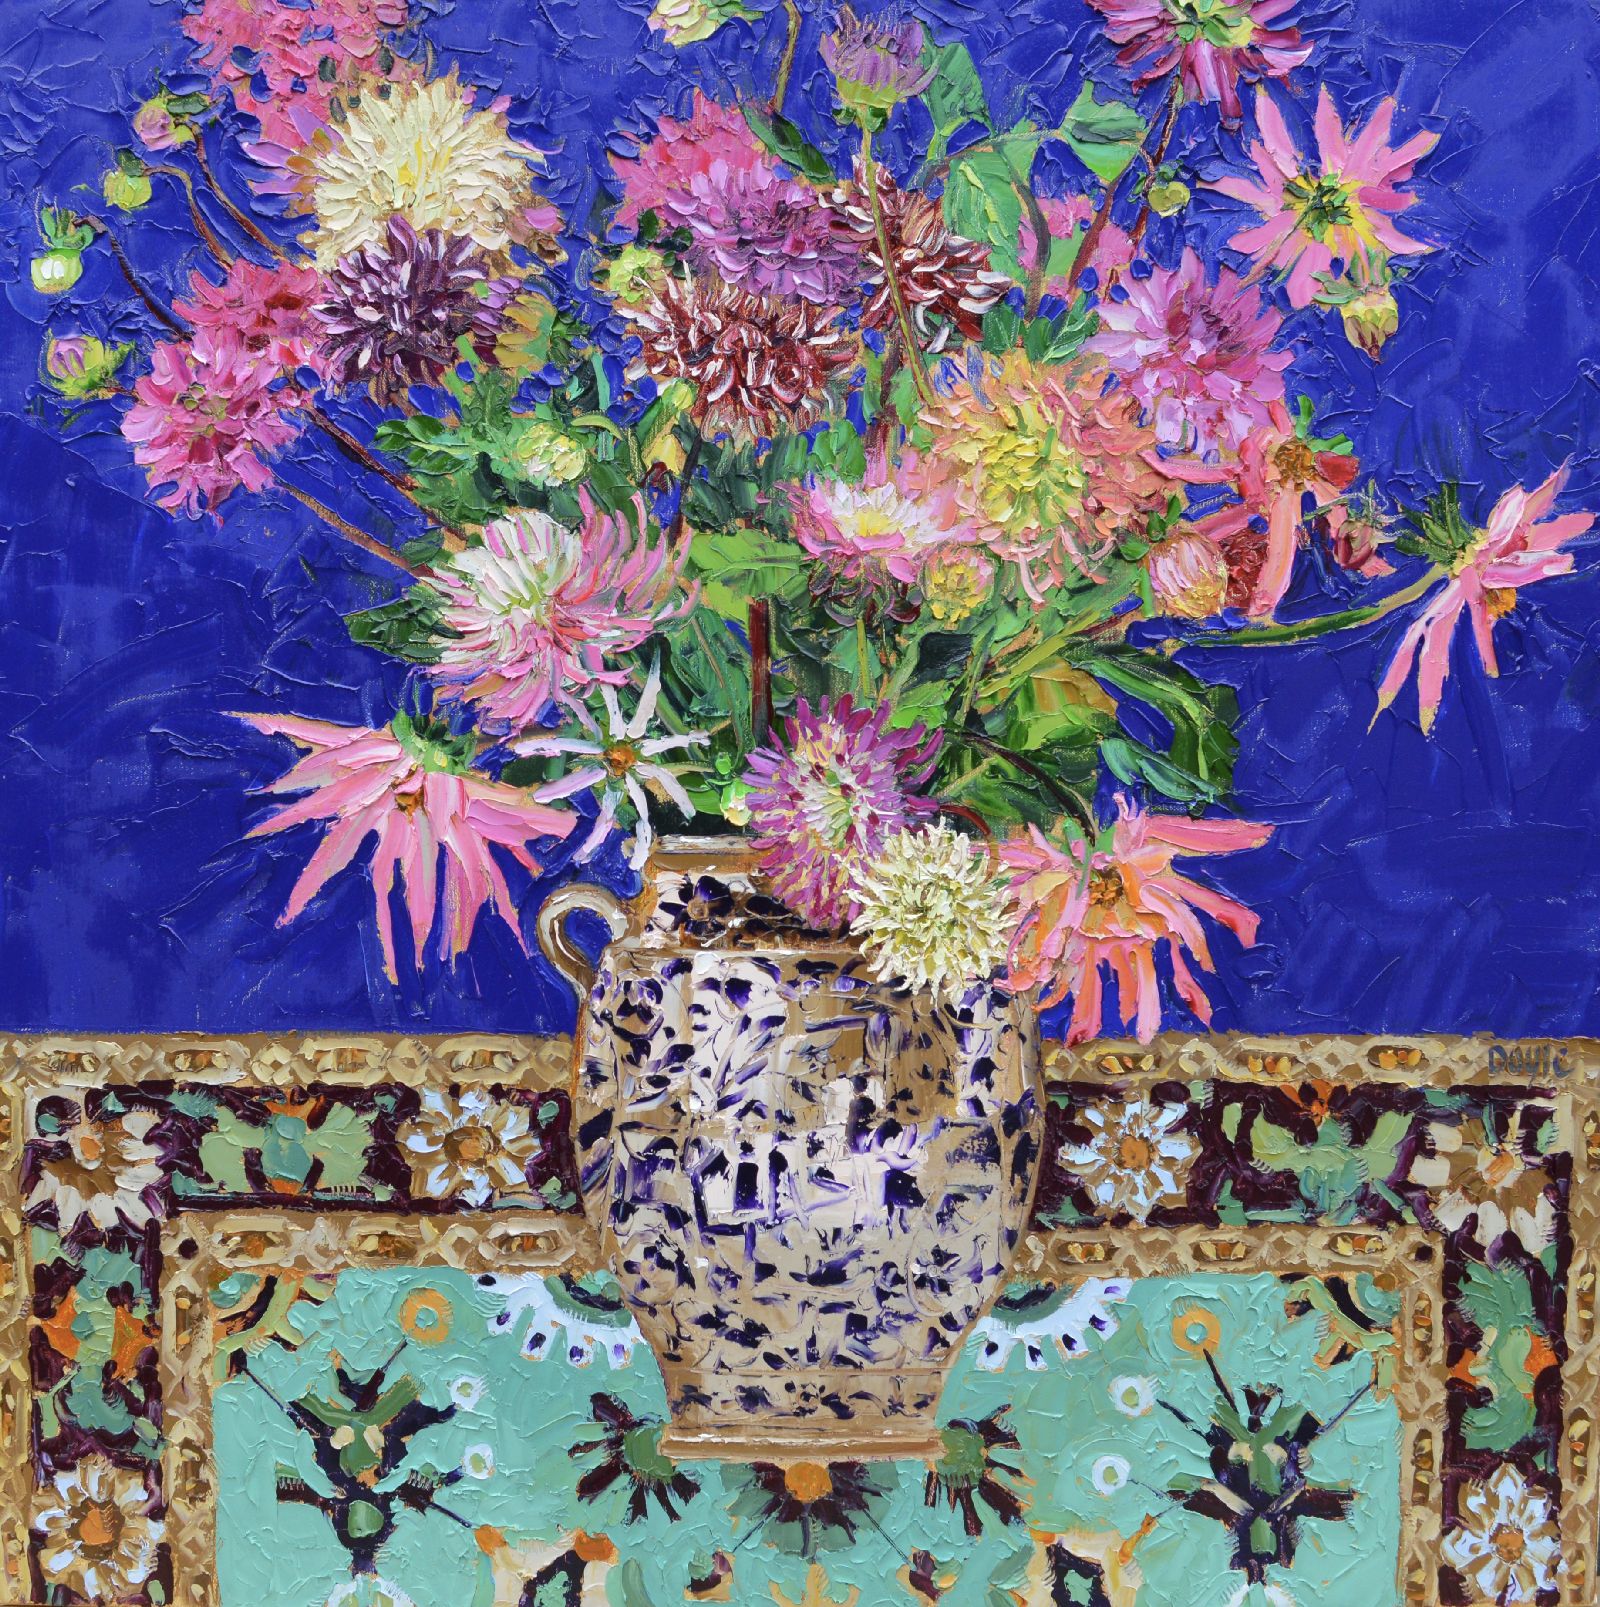 August Dahlias by Lucy Doyle